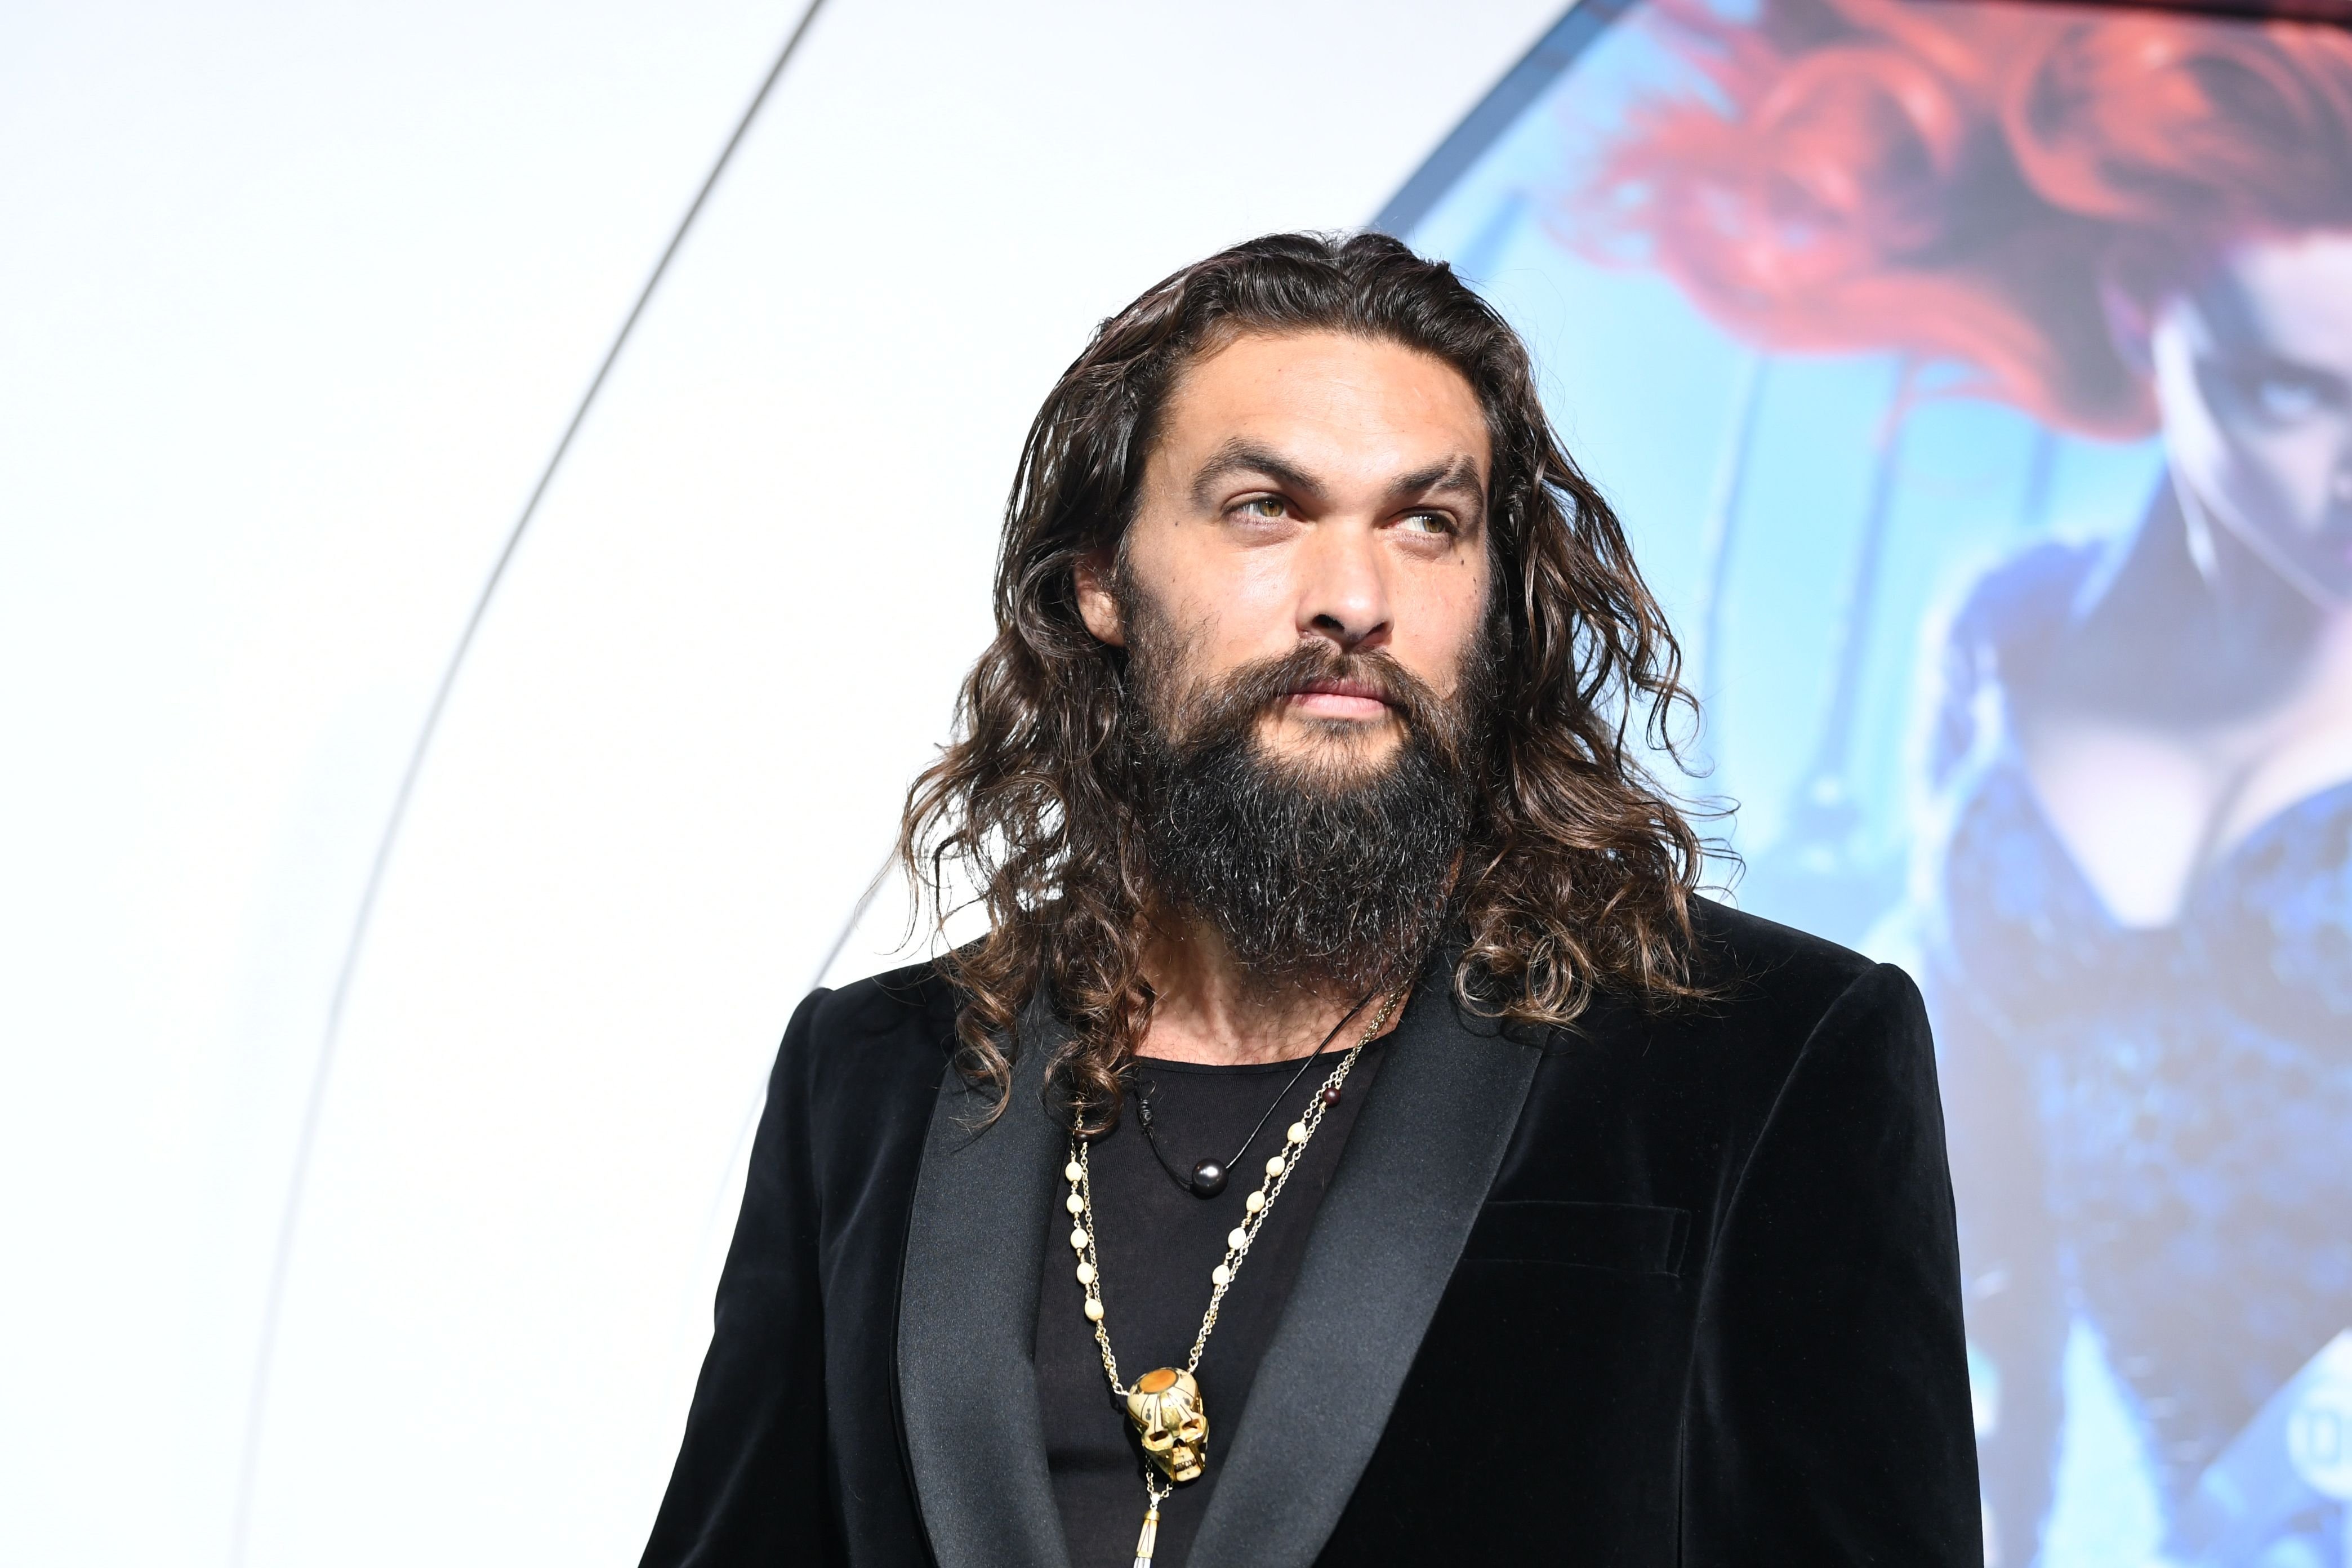 Jason Momoa arrived at the premiere of Warner Bros. Pictures' "Aquaman" at the Chinese Theatre on December 12, 2018 in Los Angeles, California. | Photo: Getty Images